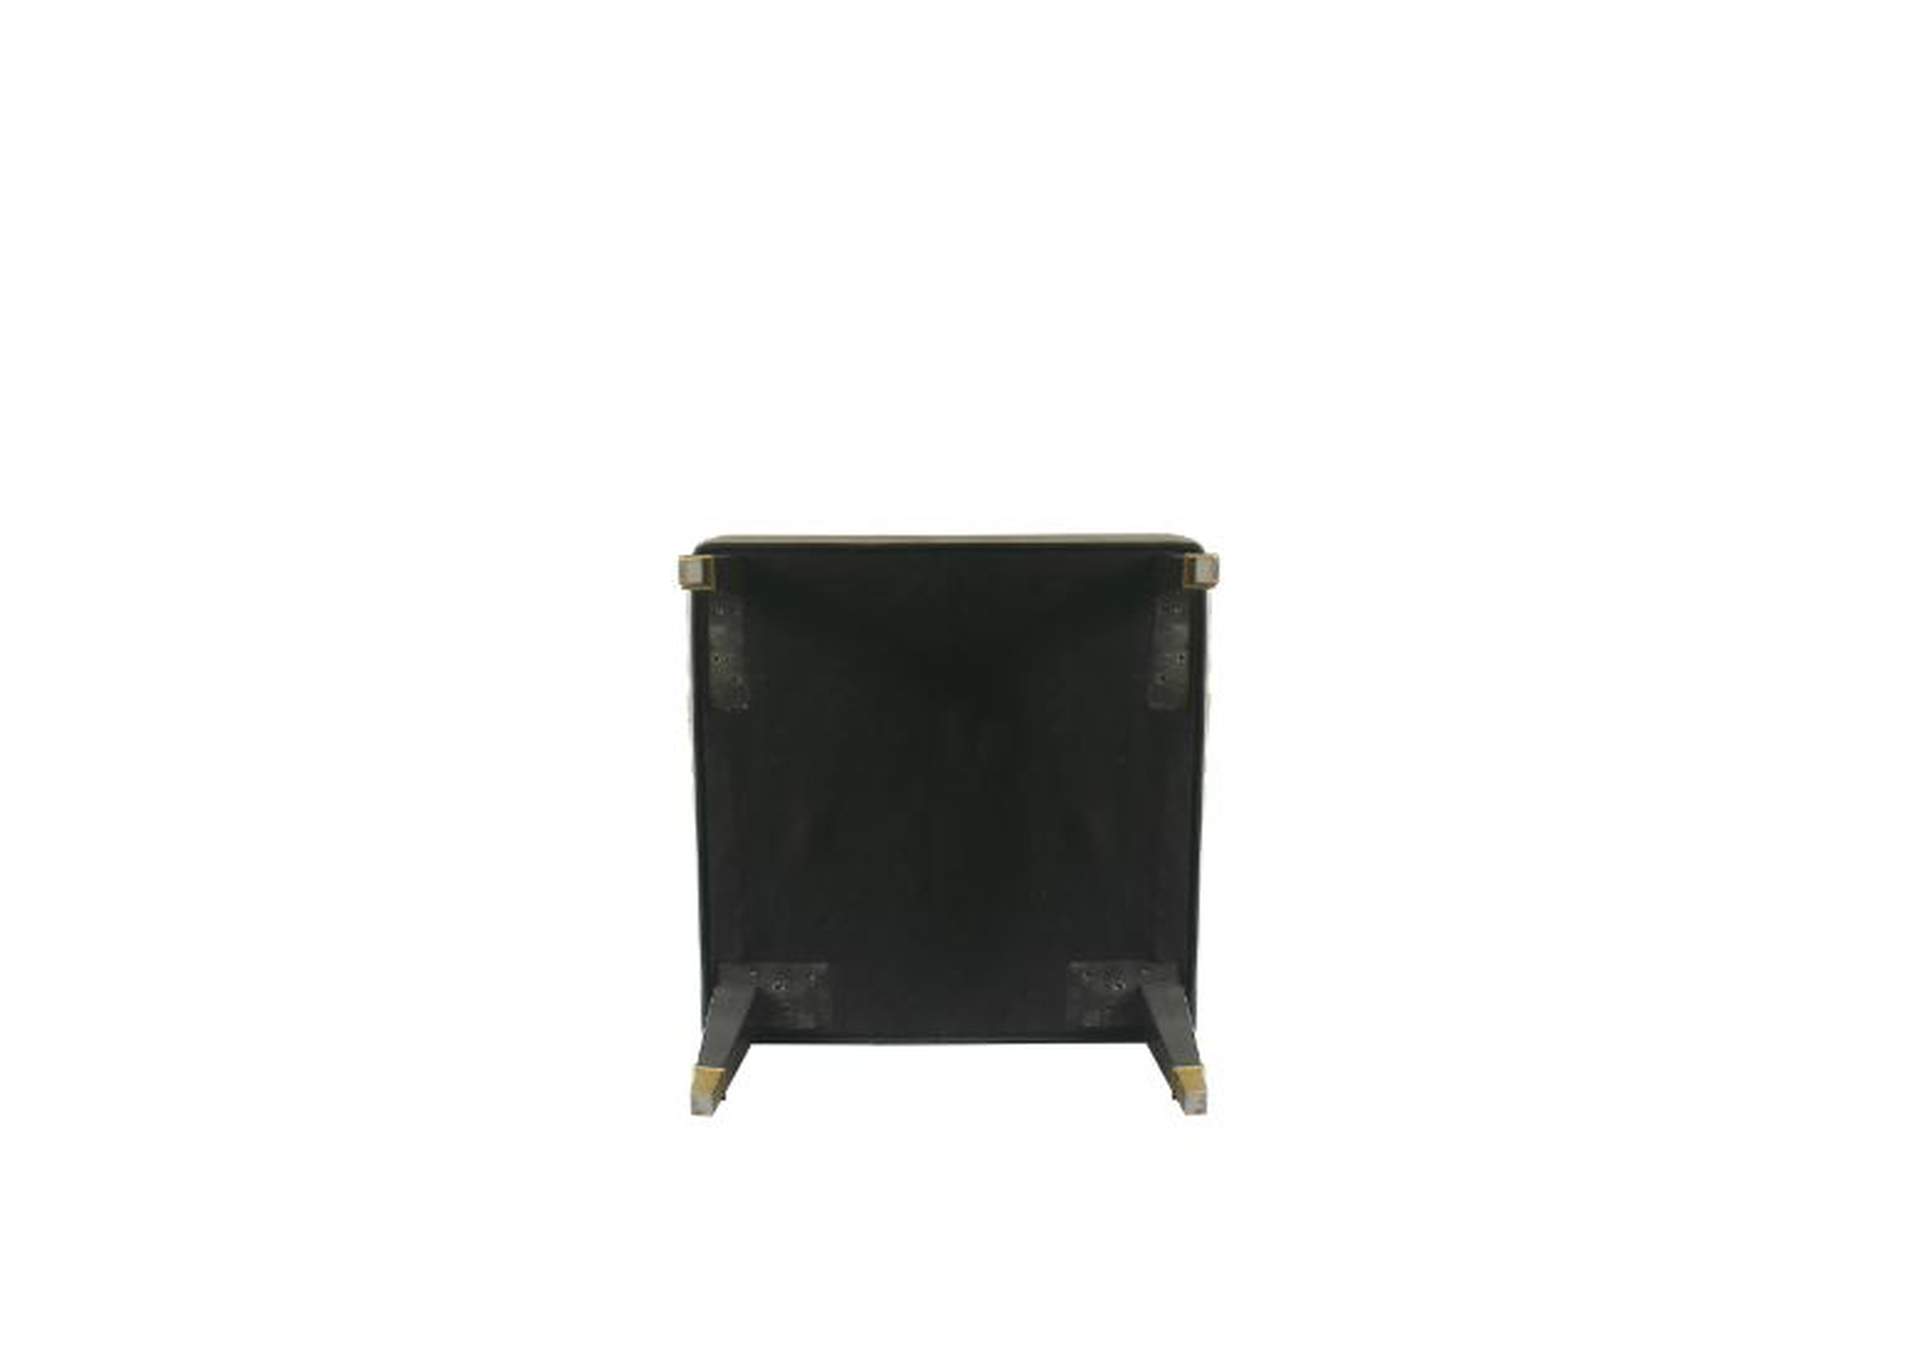 House Beatrice Accent Chair,Acme